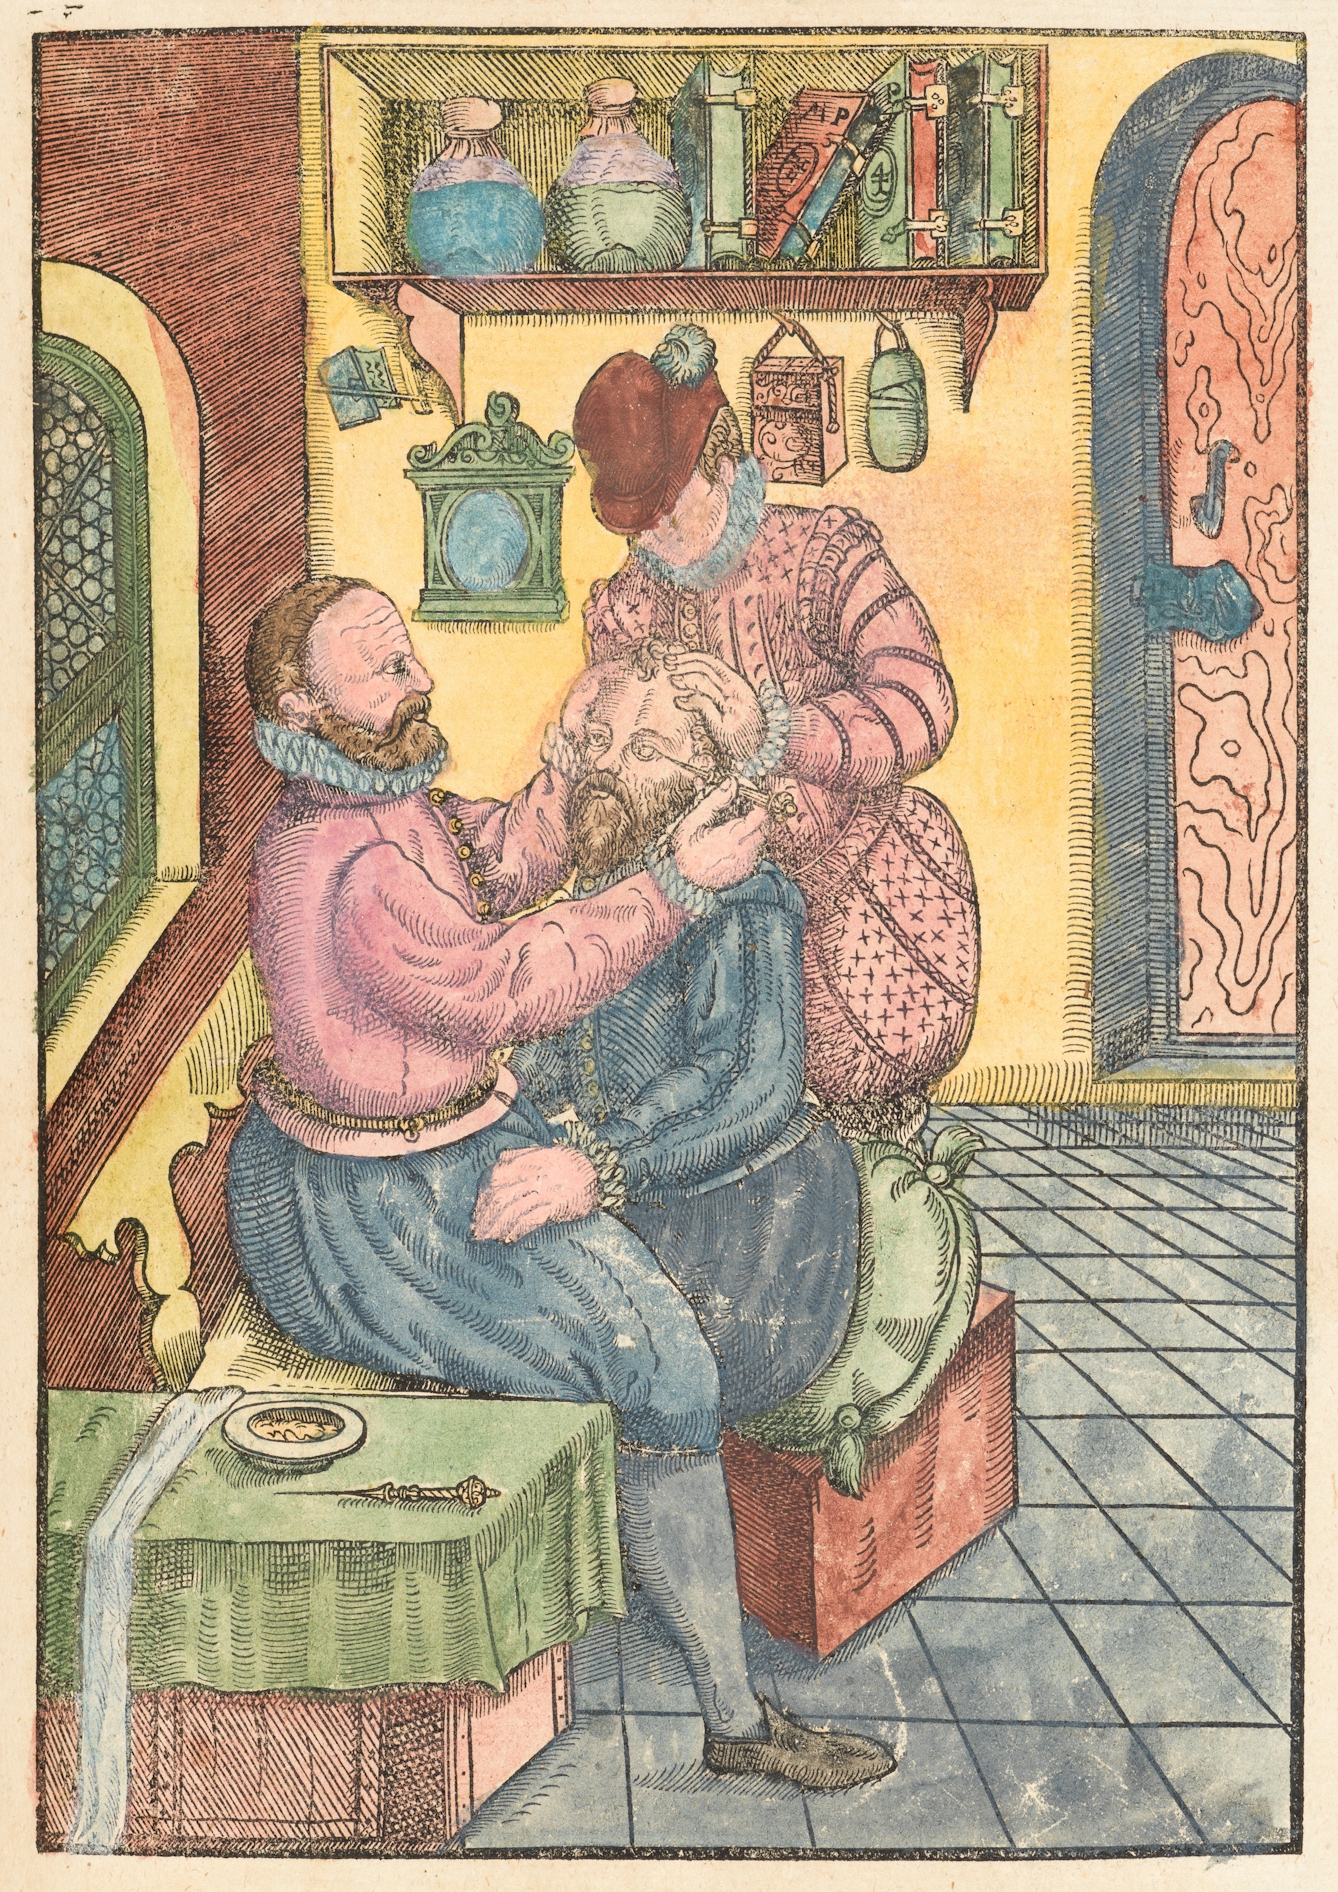 Coloured engraving in a 16th century manuscript showing a seated man having an eye operation. A man in front of him uses an piece of apparatus on the left eye of the seated man, whilst a man behind him holds his head still with his hands.